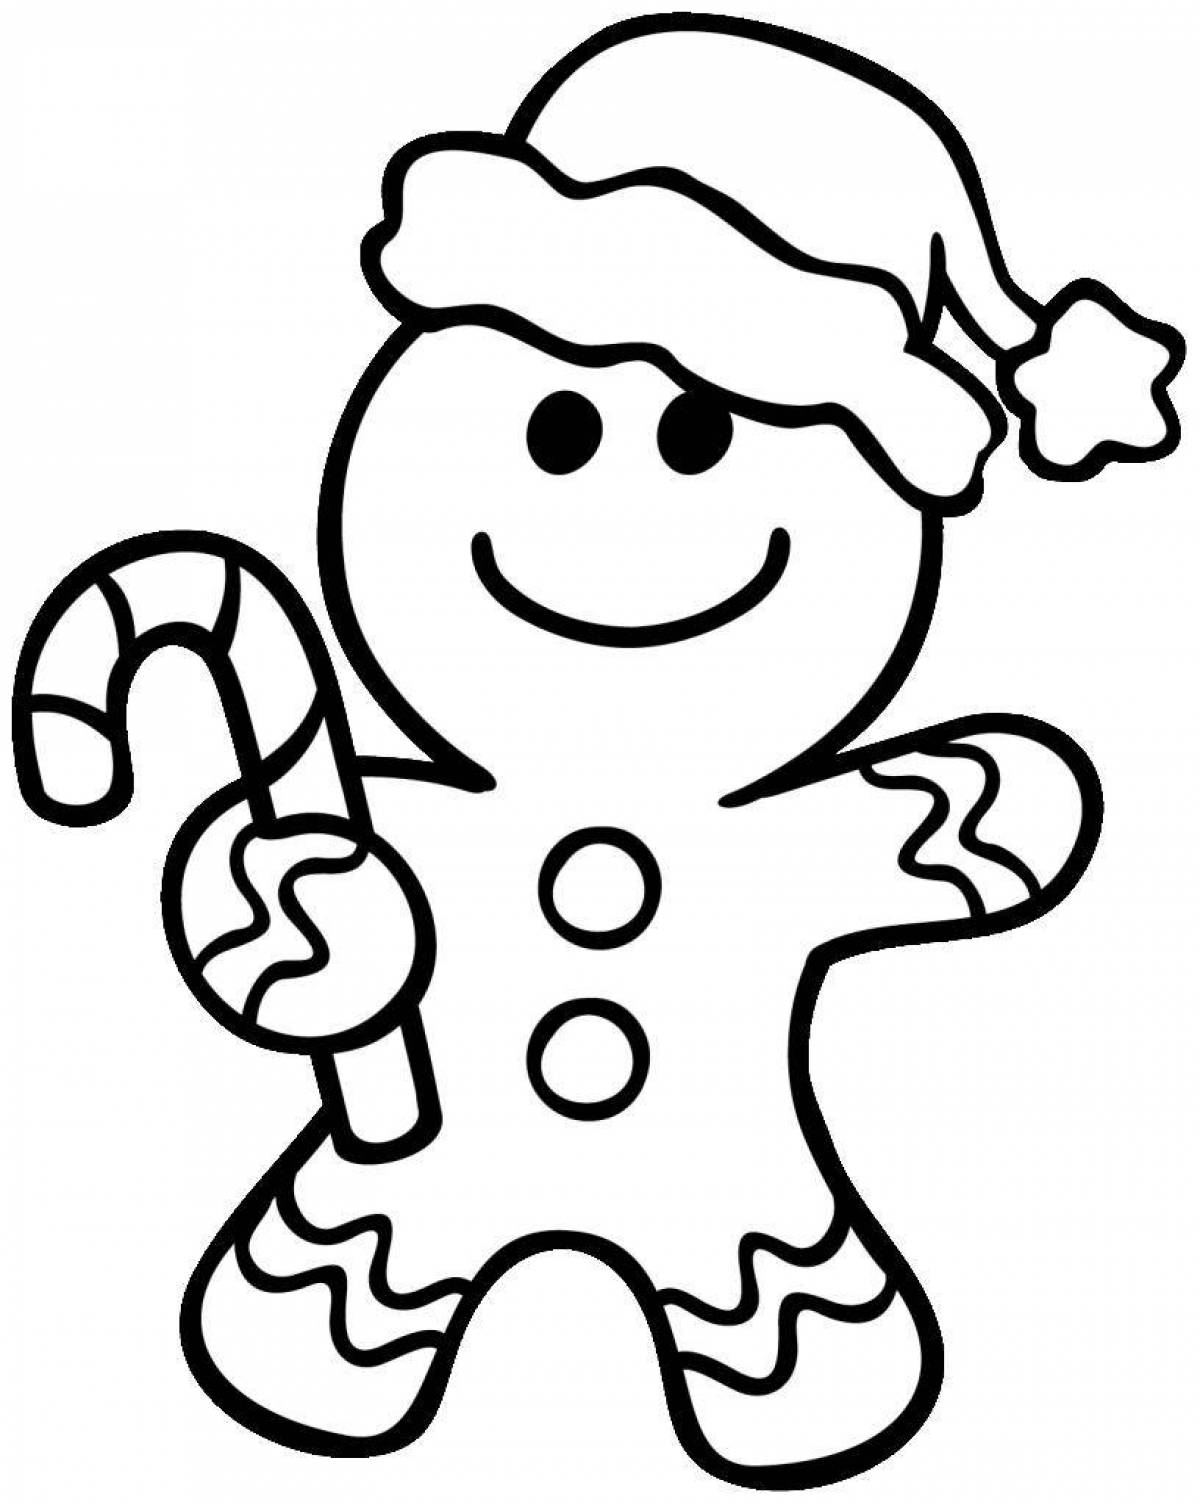 Gorgeous gingerbread man coloring page